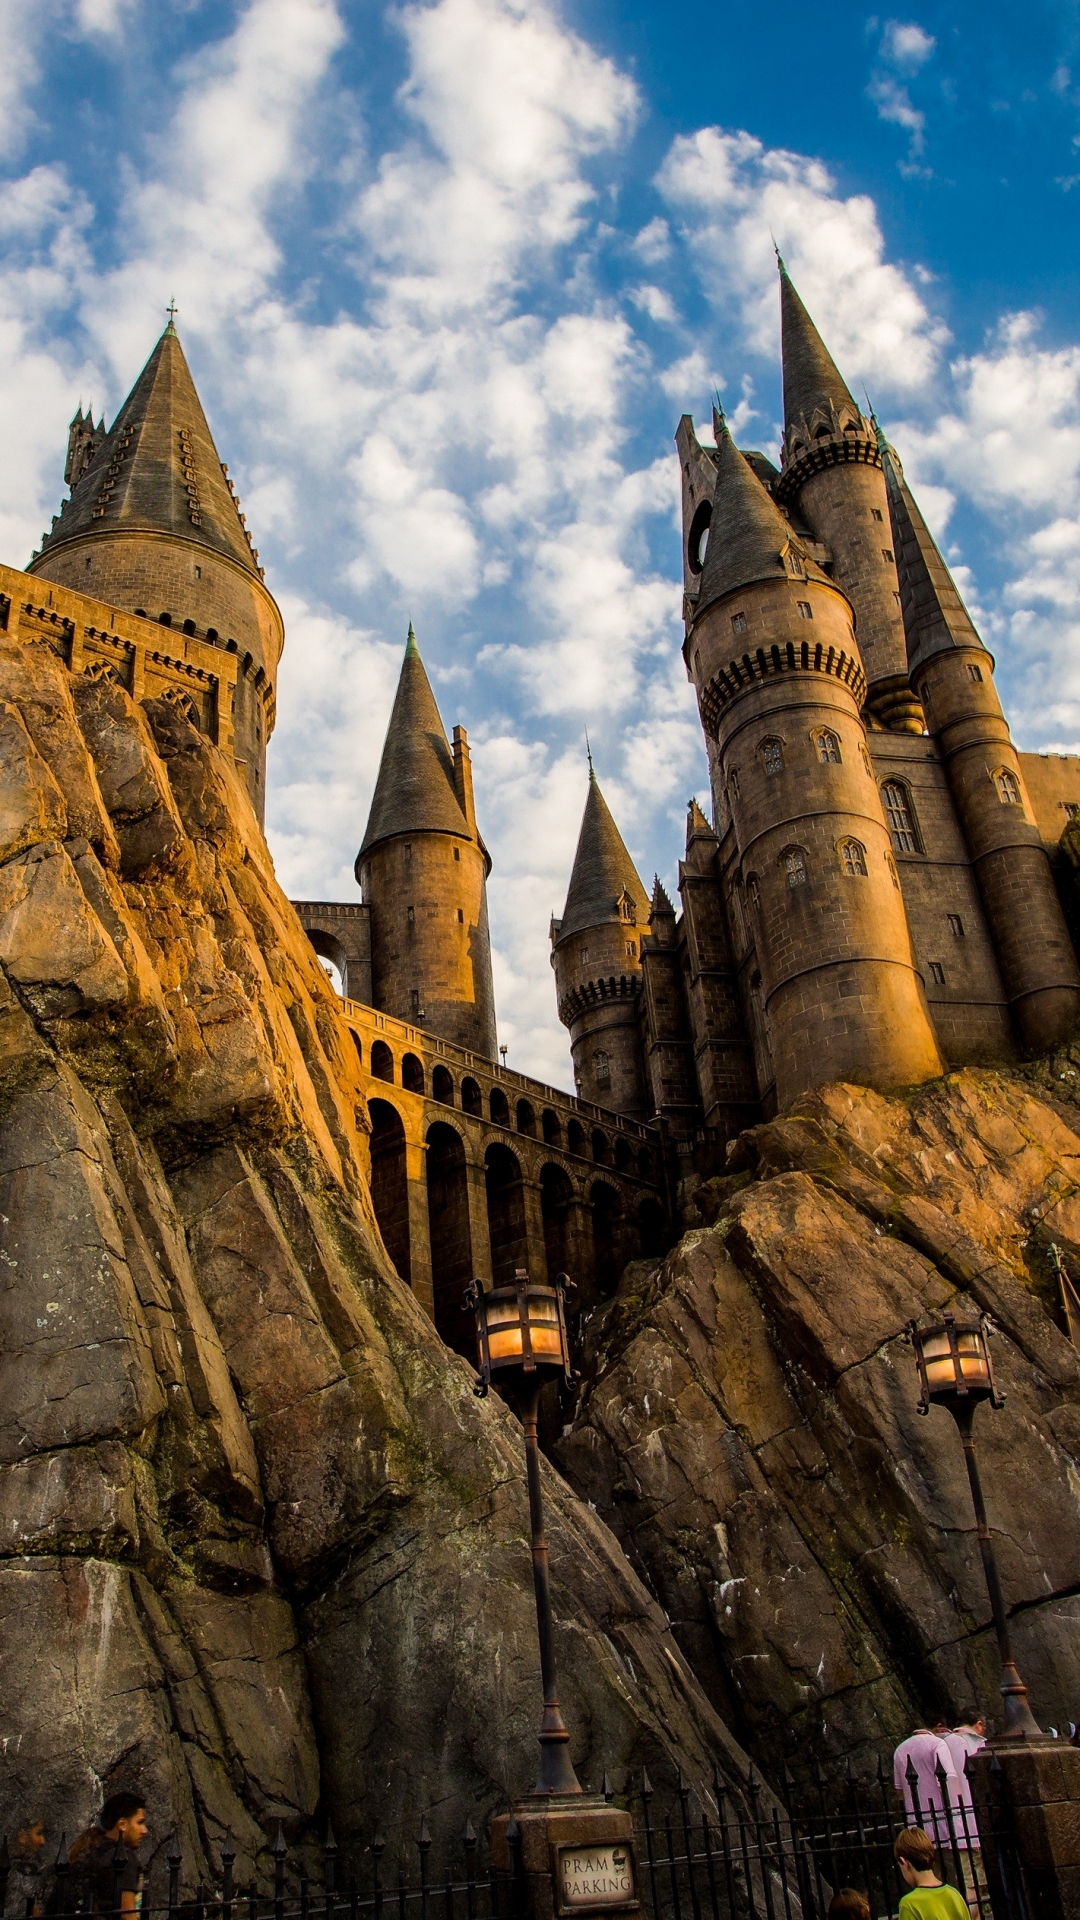 Islands Of Adventure HD Wallpapers and Backgrounds